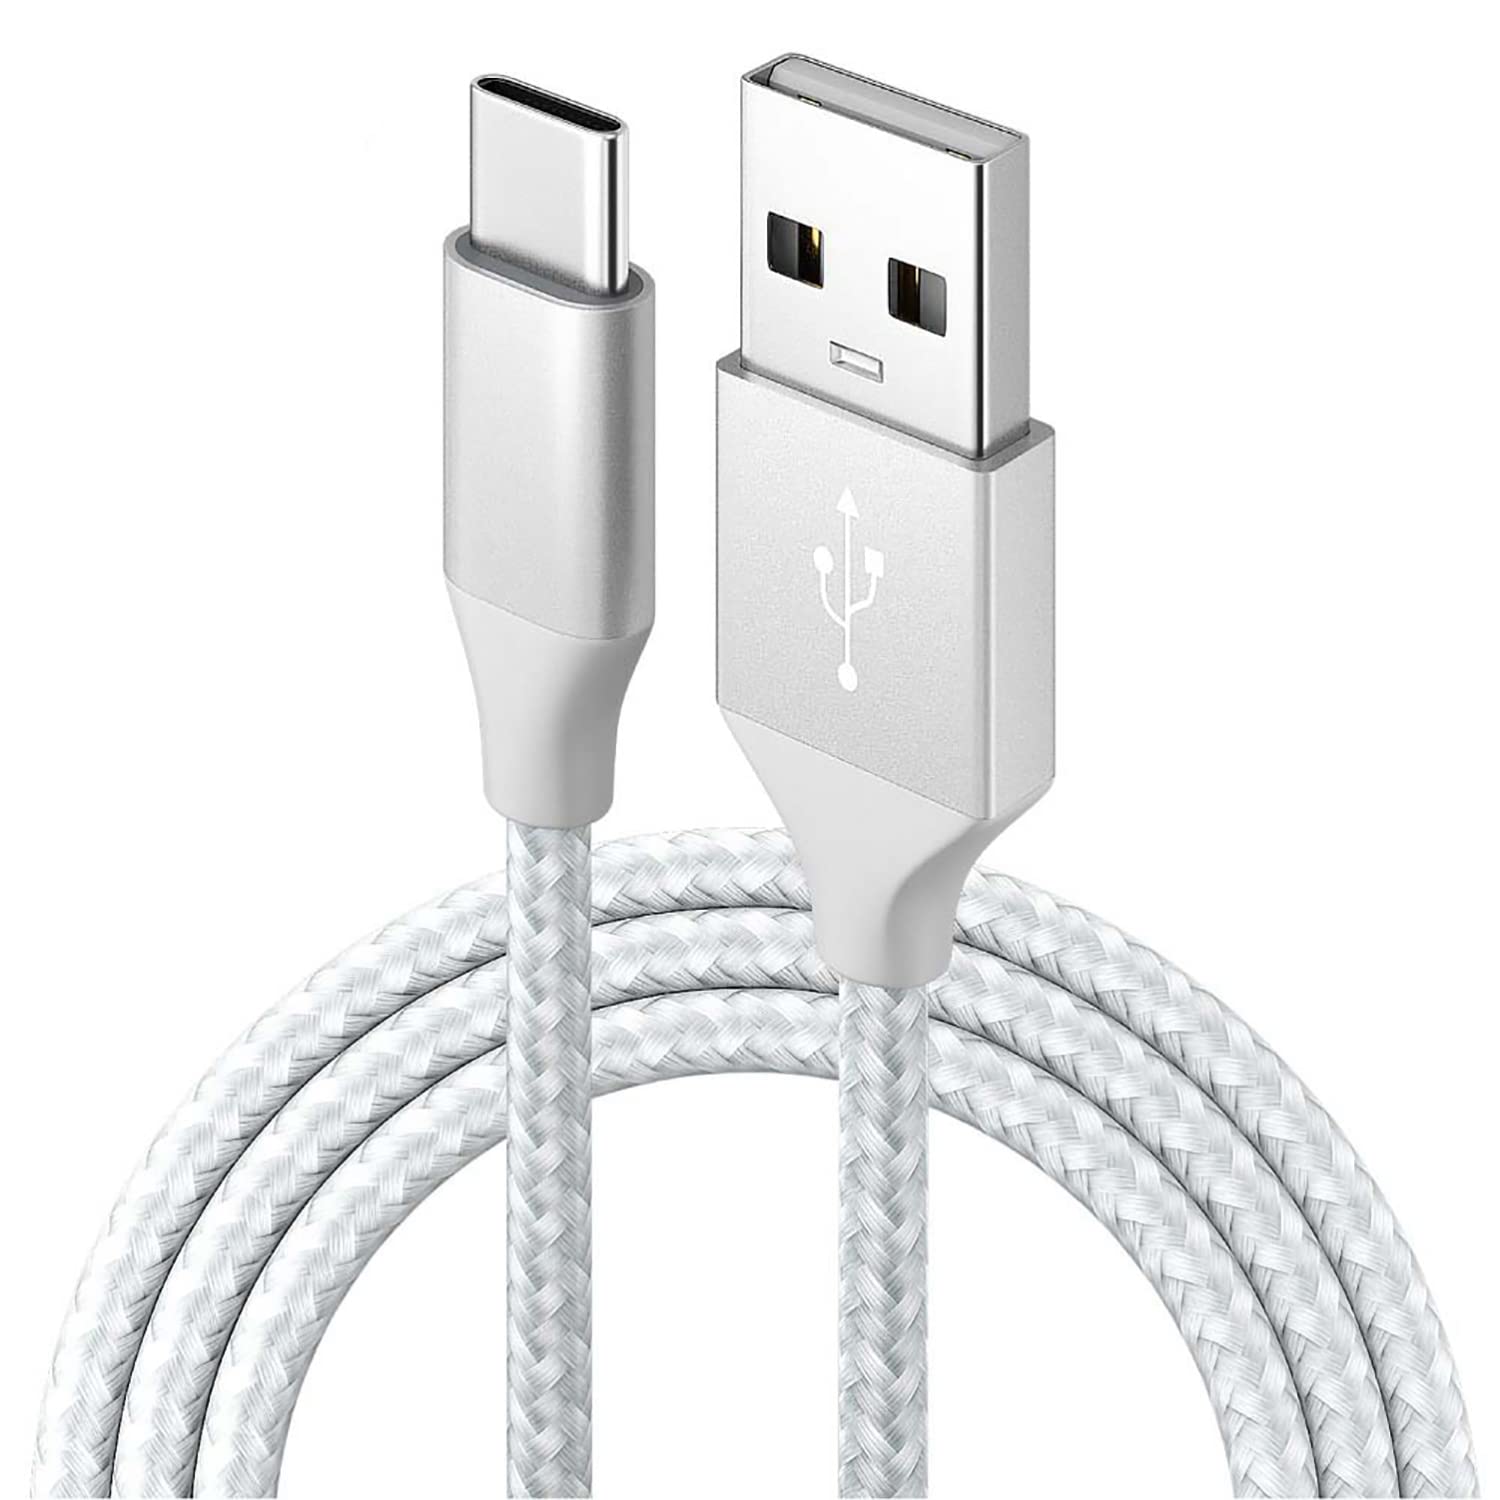 10Ft USB to Type C Fast Charger Cable Cord for iPad Pro 12.9-inch (3rd 4th 5th Generations), iPad Pro 11-inch (1st 2nd 3rd Generations), New iPad Mini 6th & iPad Air 4th Generation Charging Cable